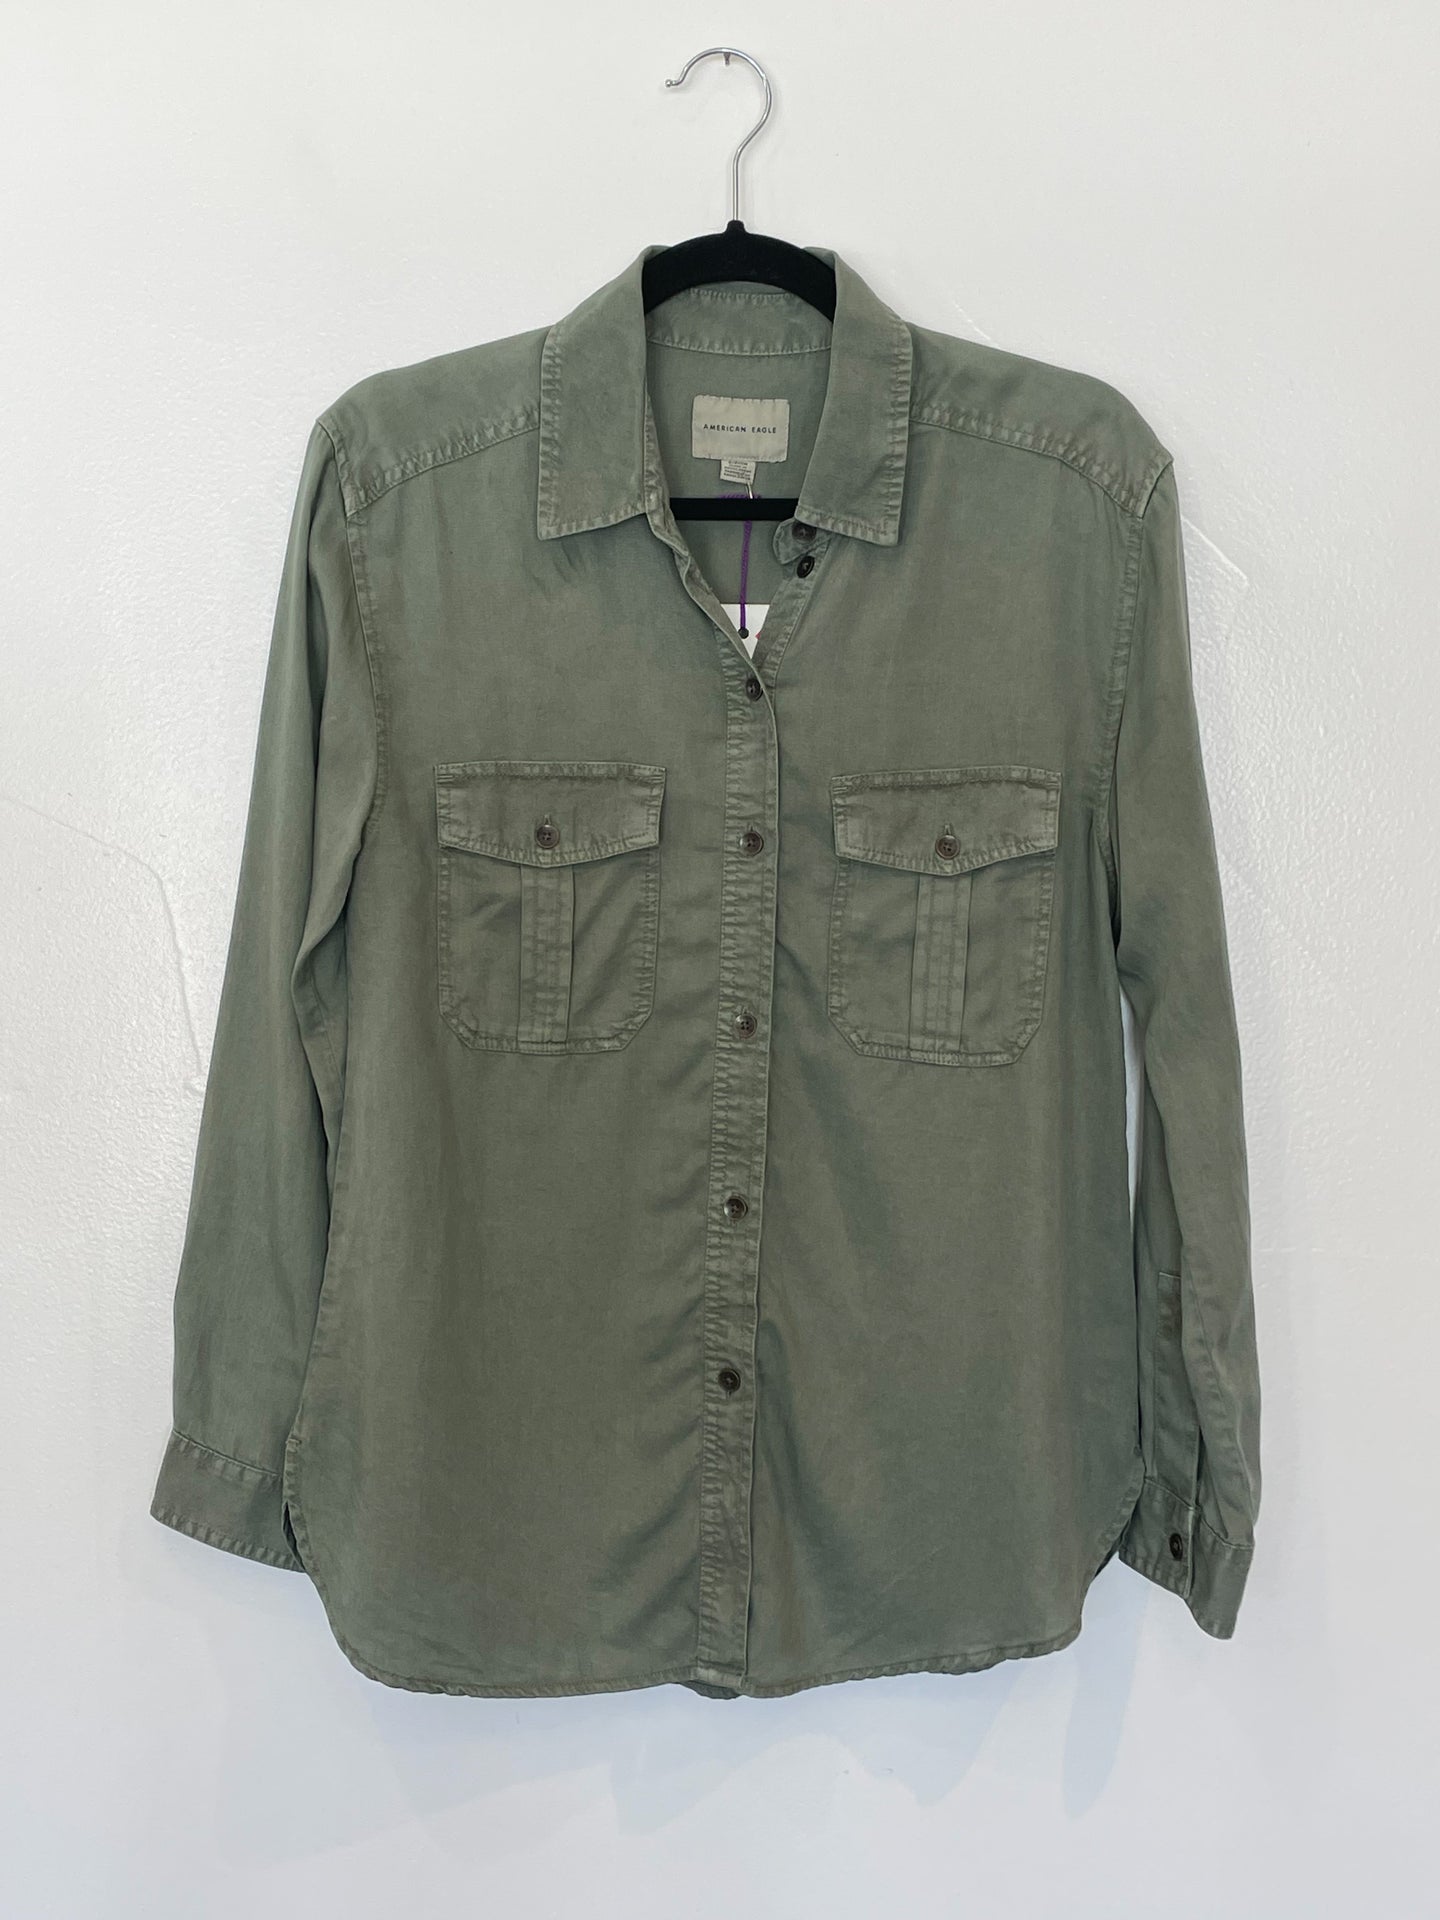 Army Green Long Sleeve Tencel Button Up